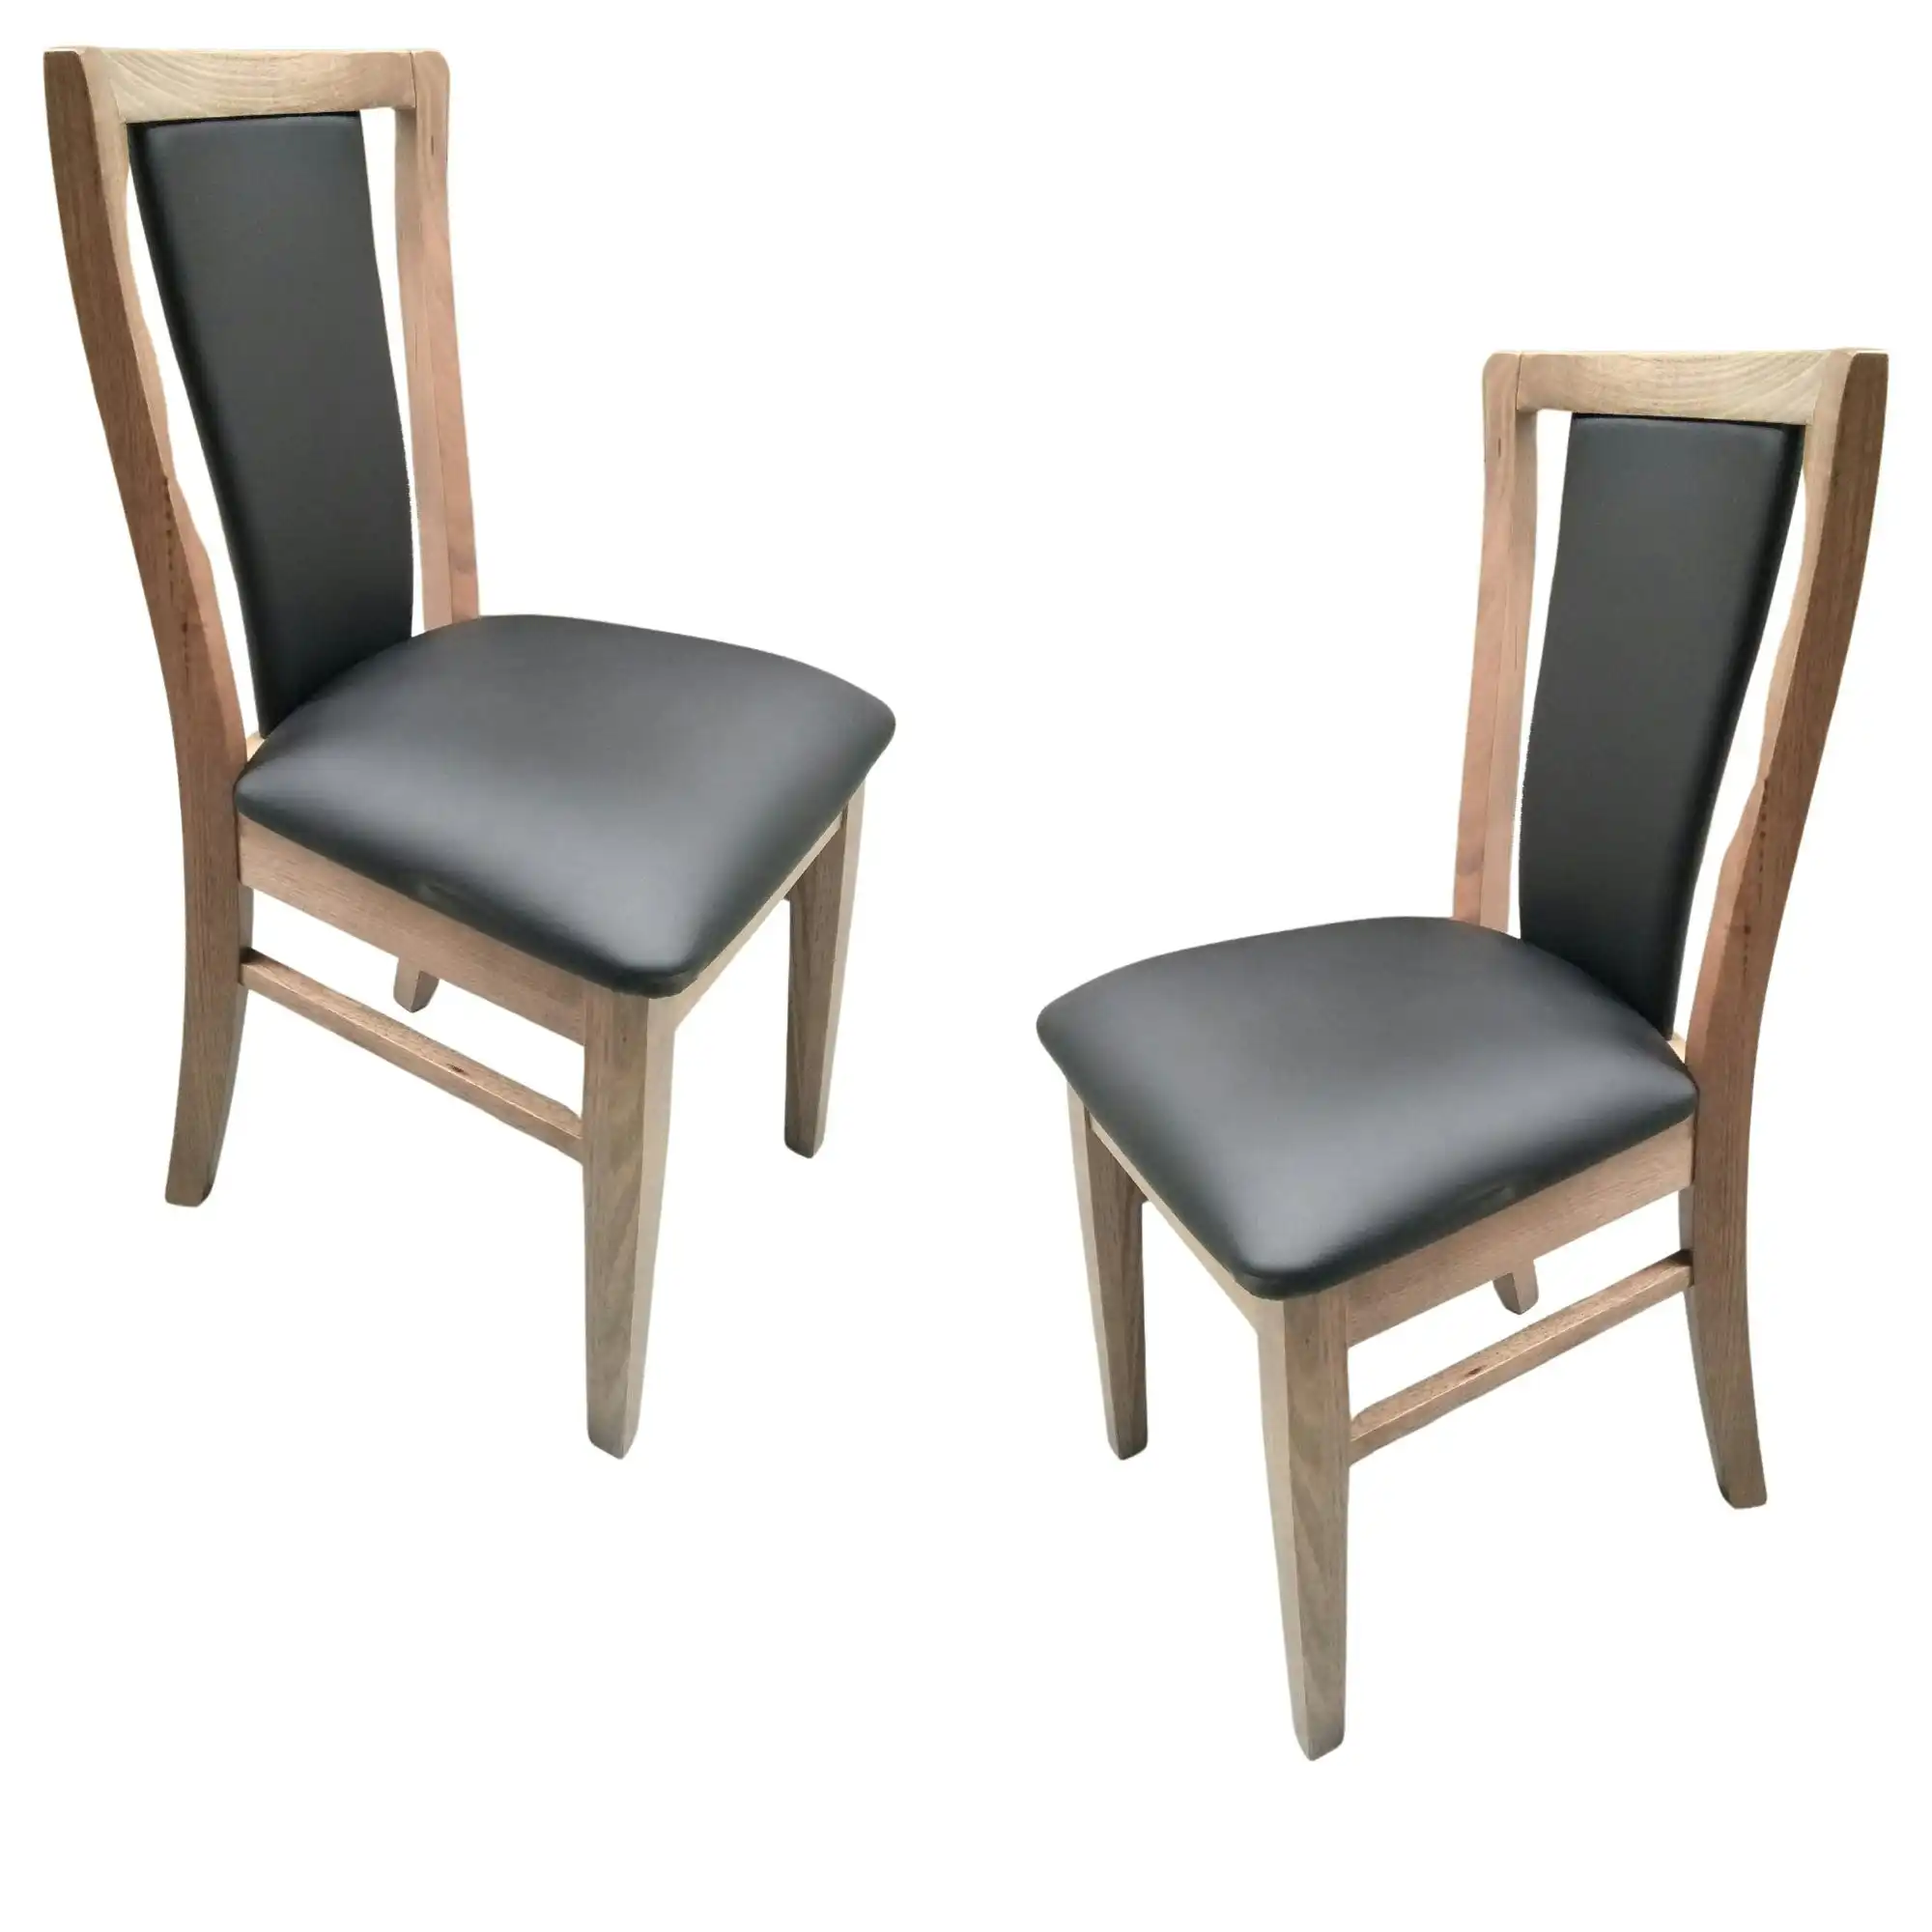 Fairmont 2pc Set PU Padded Back Dining Chair